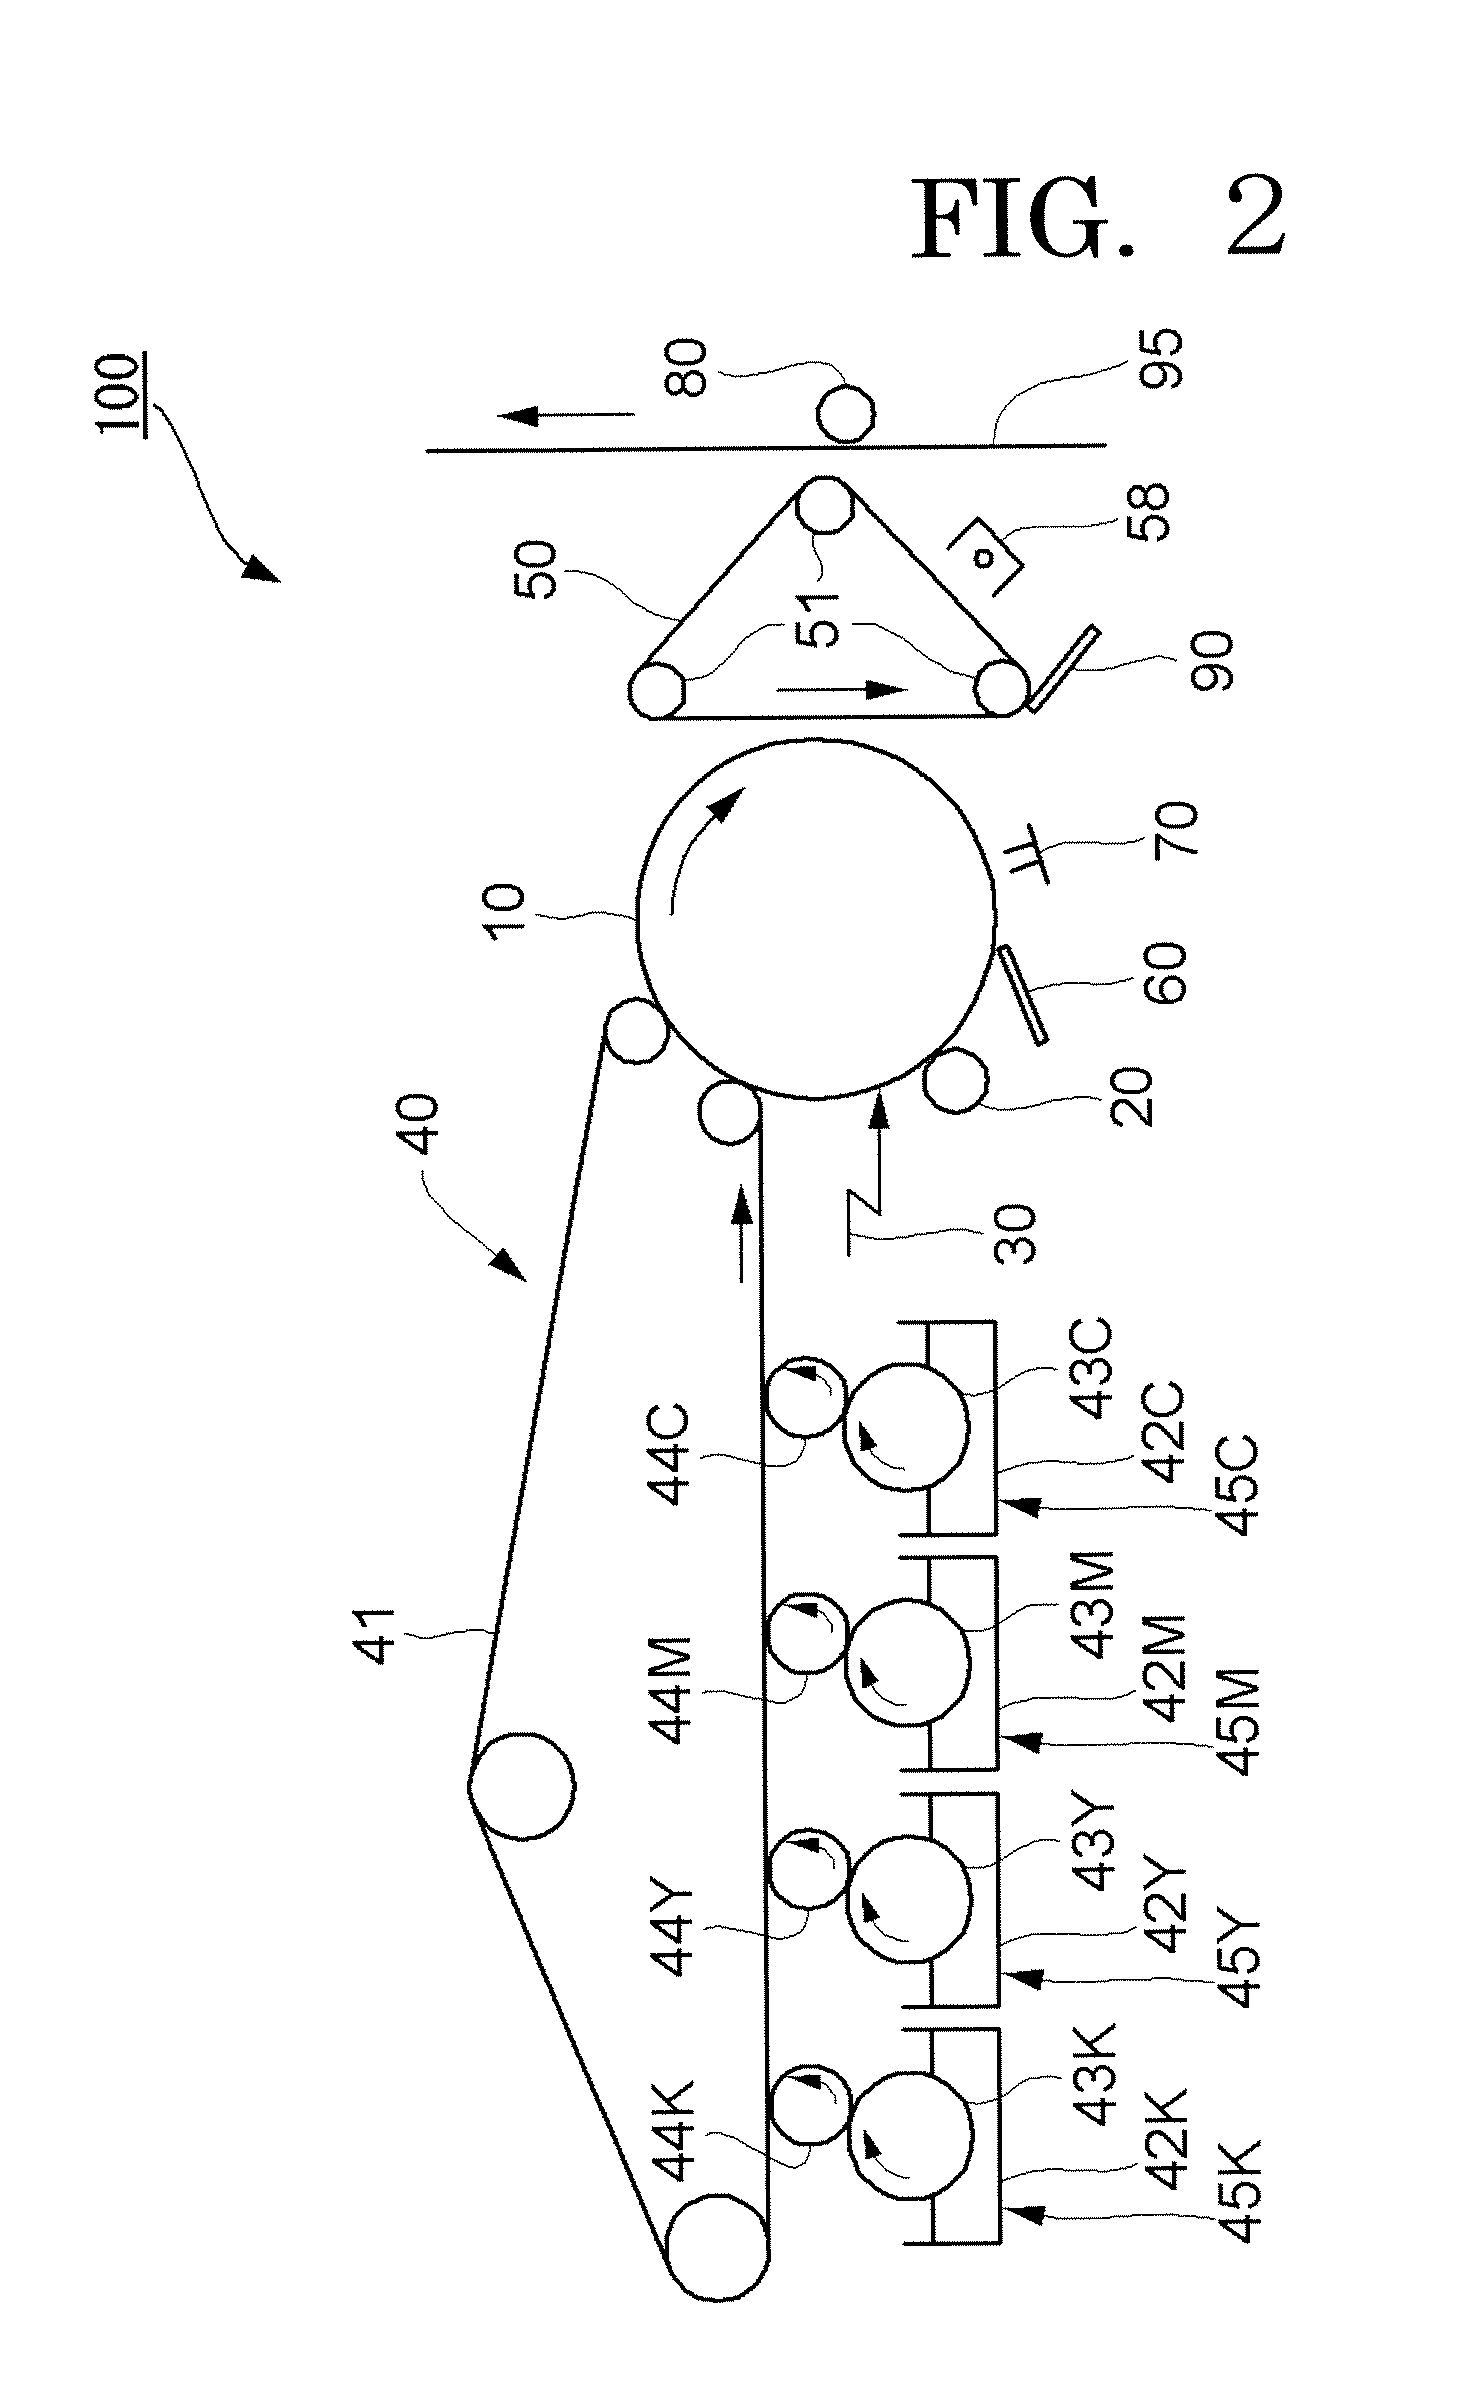 Toner as well as developer and image forming method using the same